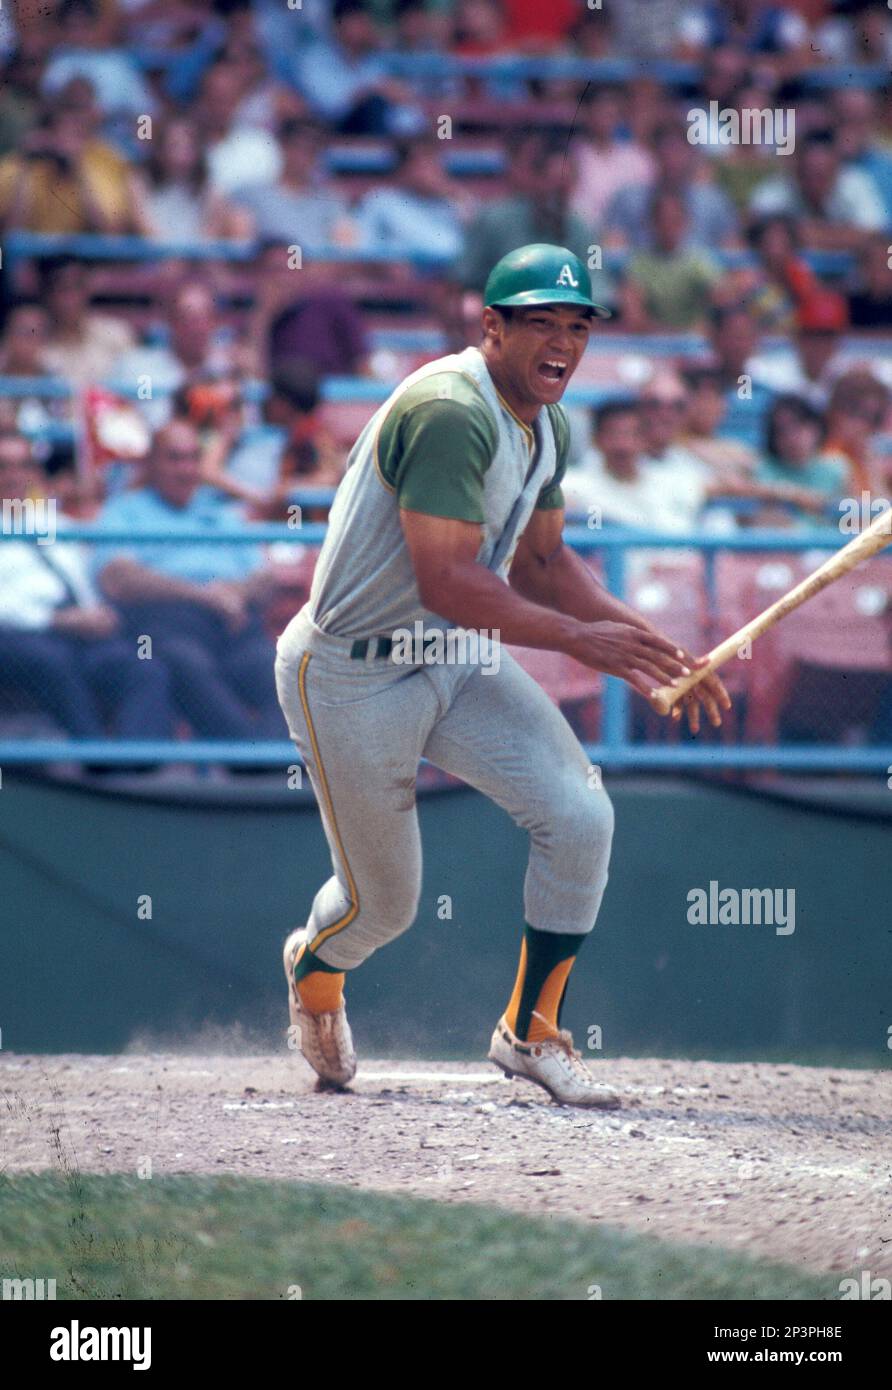 Oakland A's Reggie Jackson (9) in action during a game from his 1969  season. Reggie Jackson played for 21 years with 4 different teams and was  inducted to the Baseball Hall of